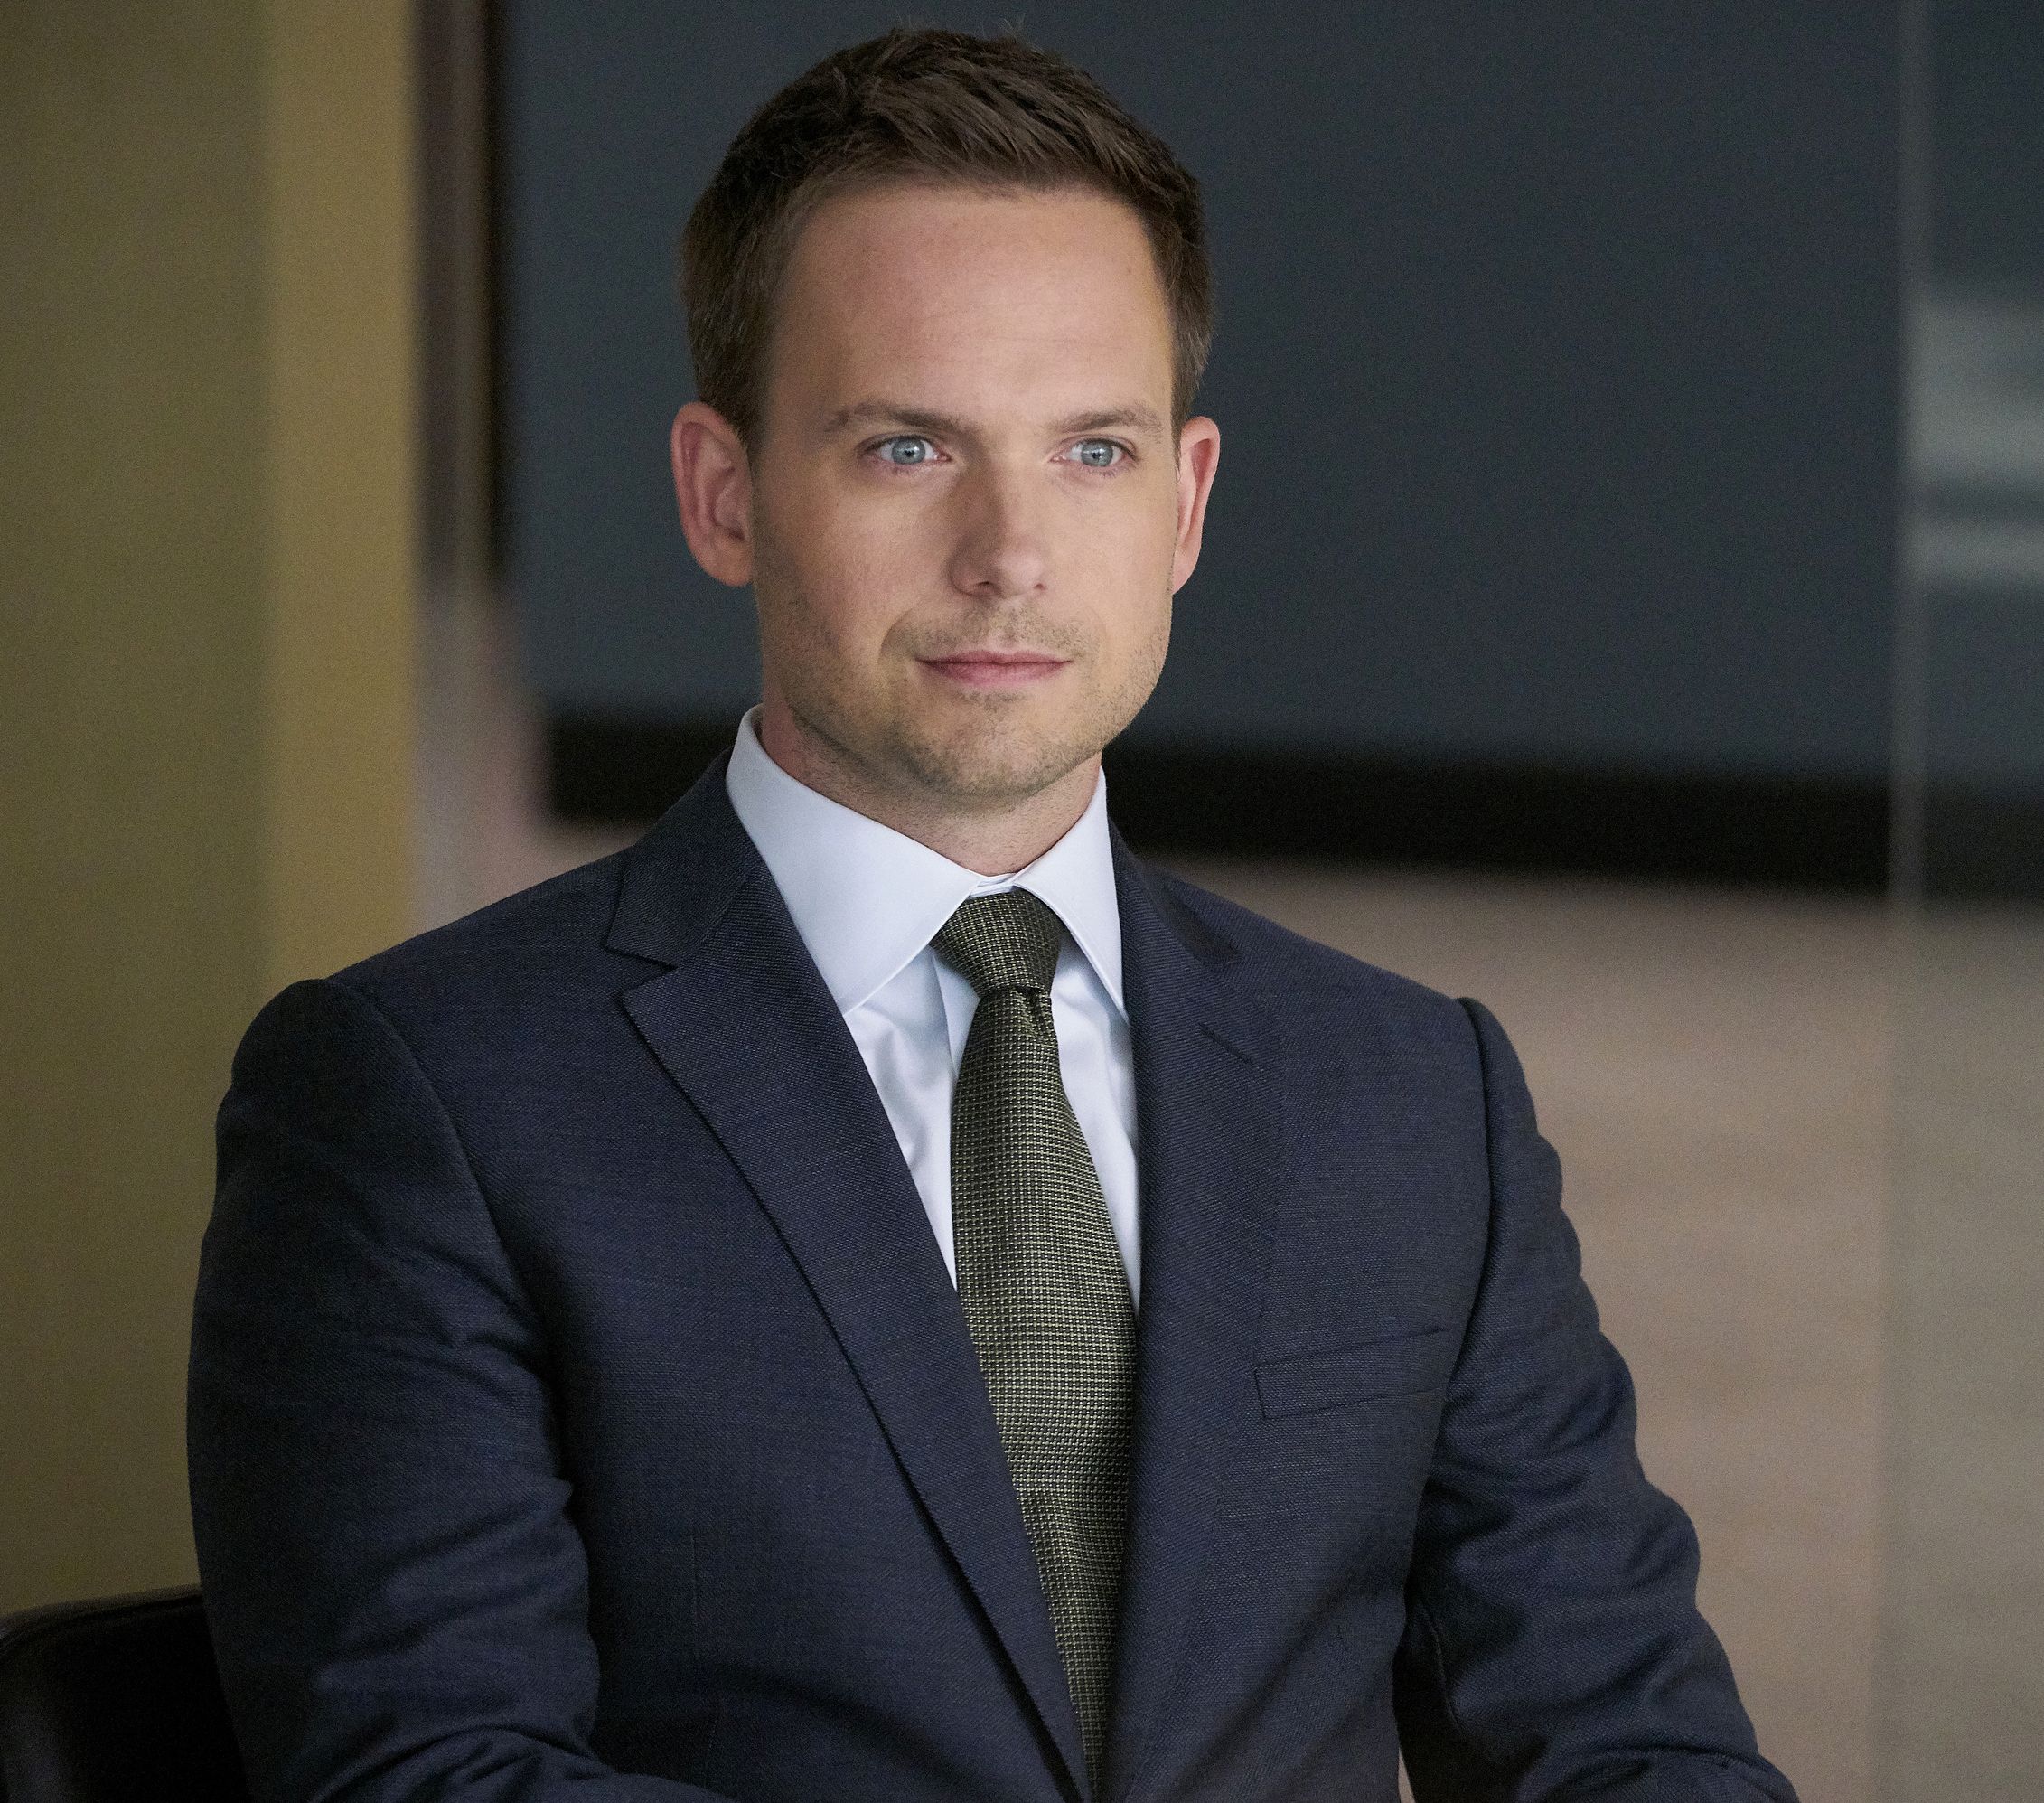 Suits spin-off: Pearson: This is what you may want to know about 'Suits'  spin-off series' plot, crew, cast, streaming platform and more - The  Economic Times